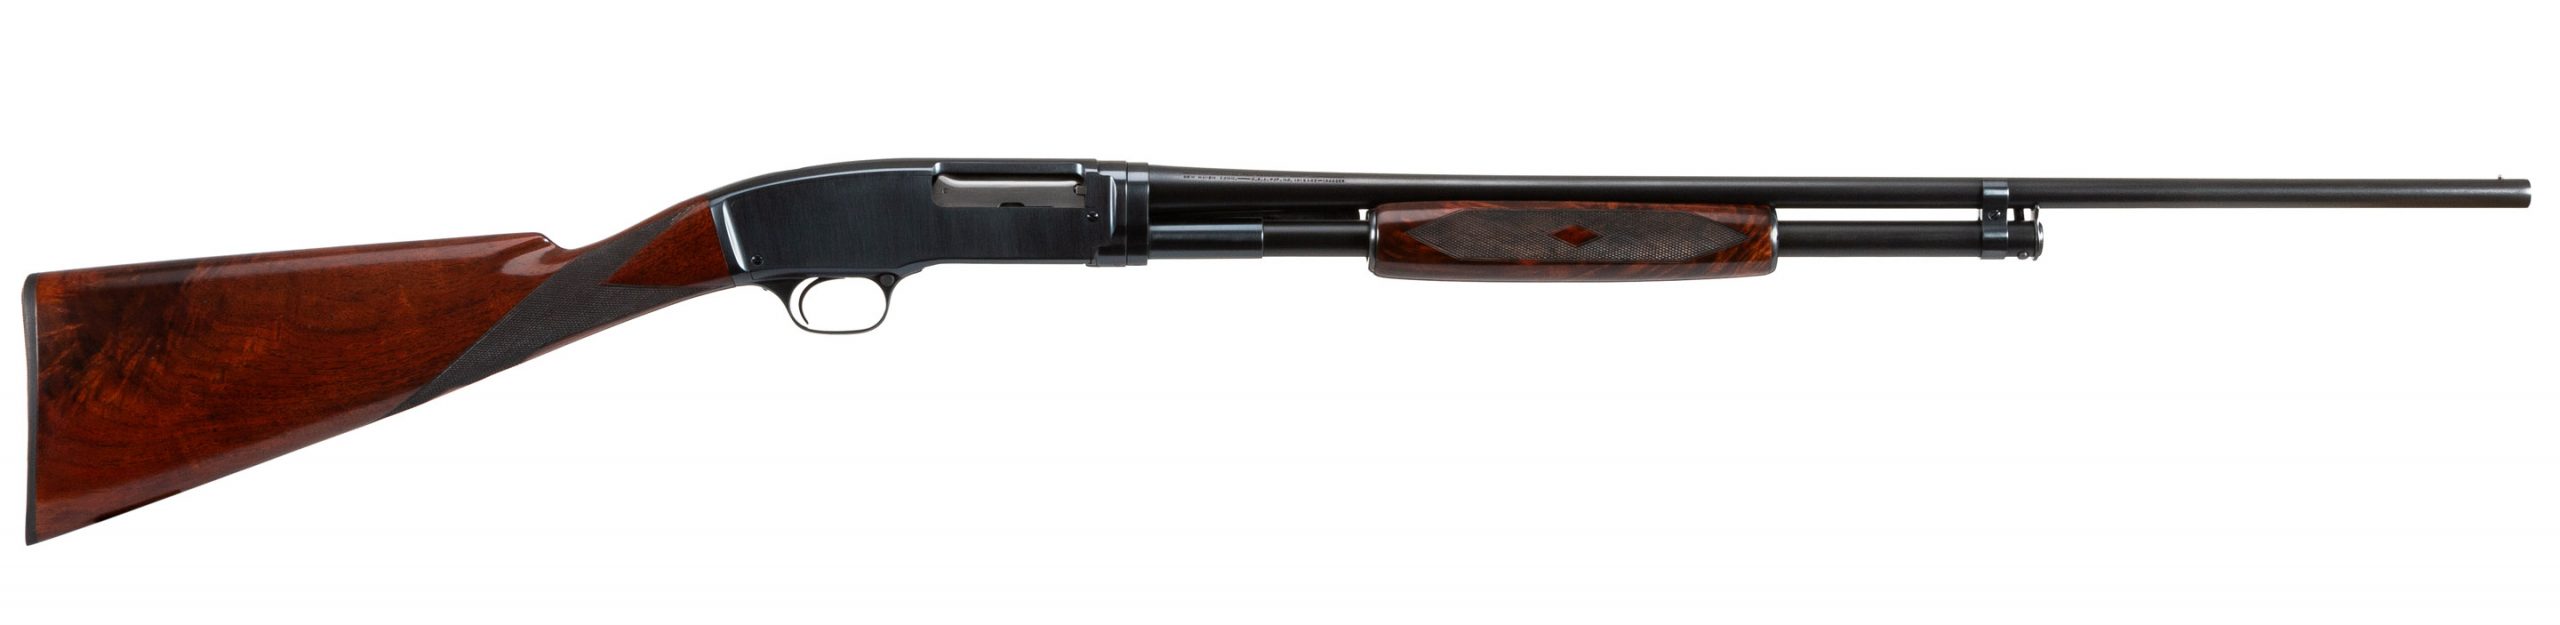 The Model 42 is an iconic shotgun.